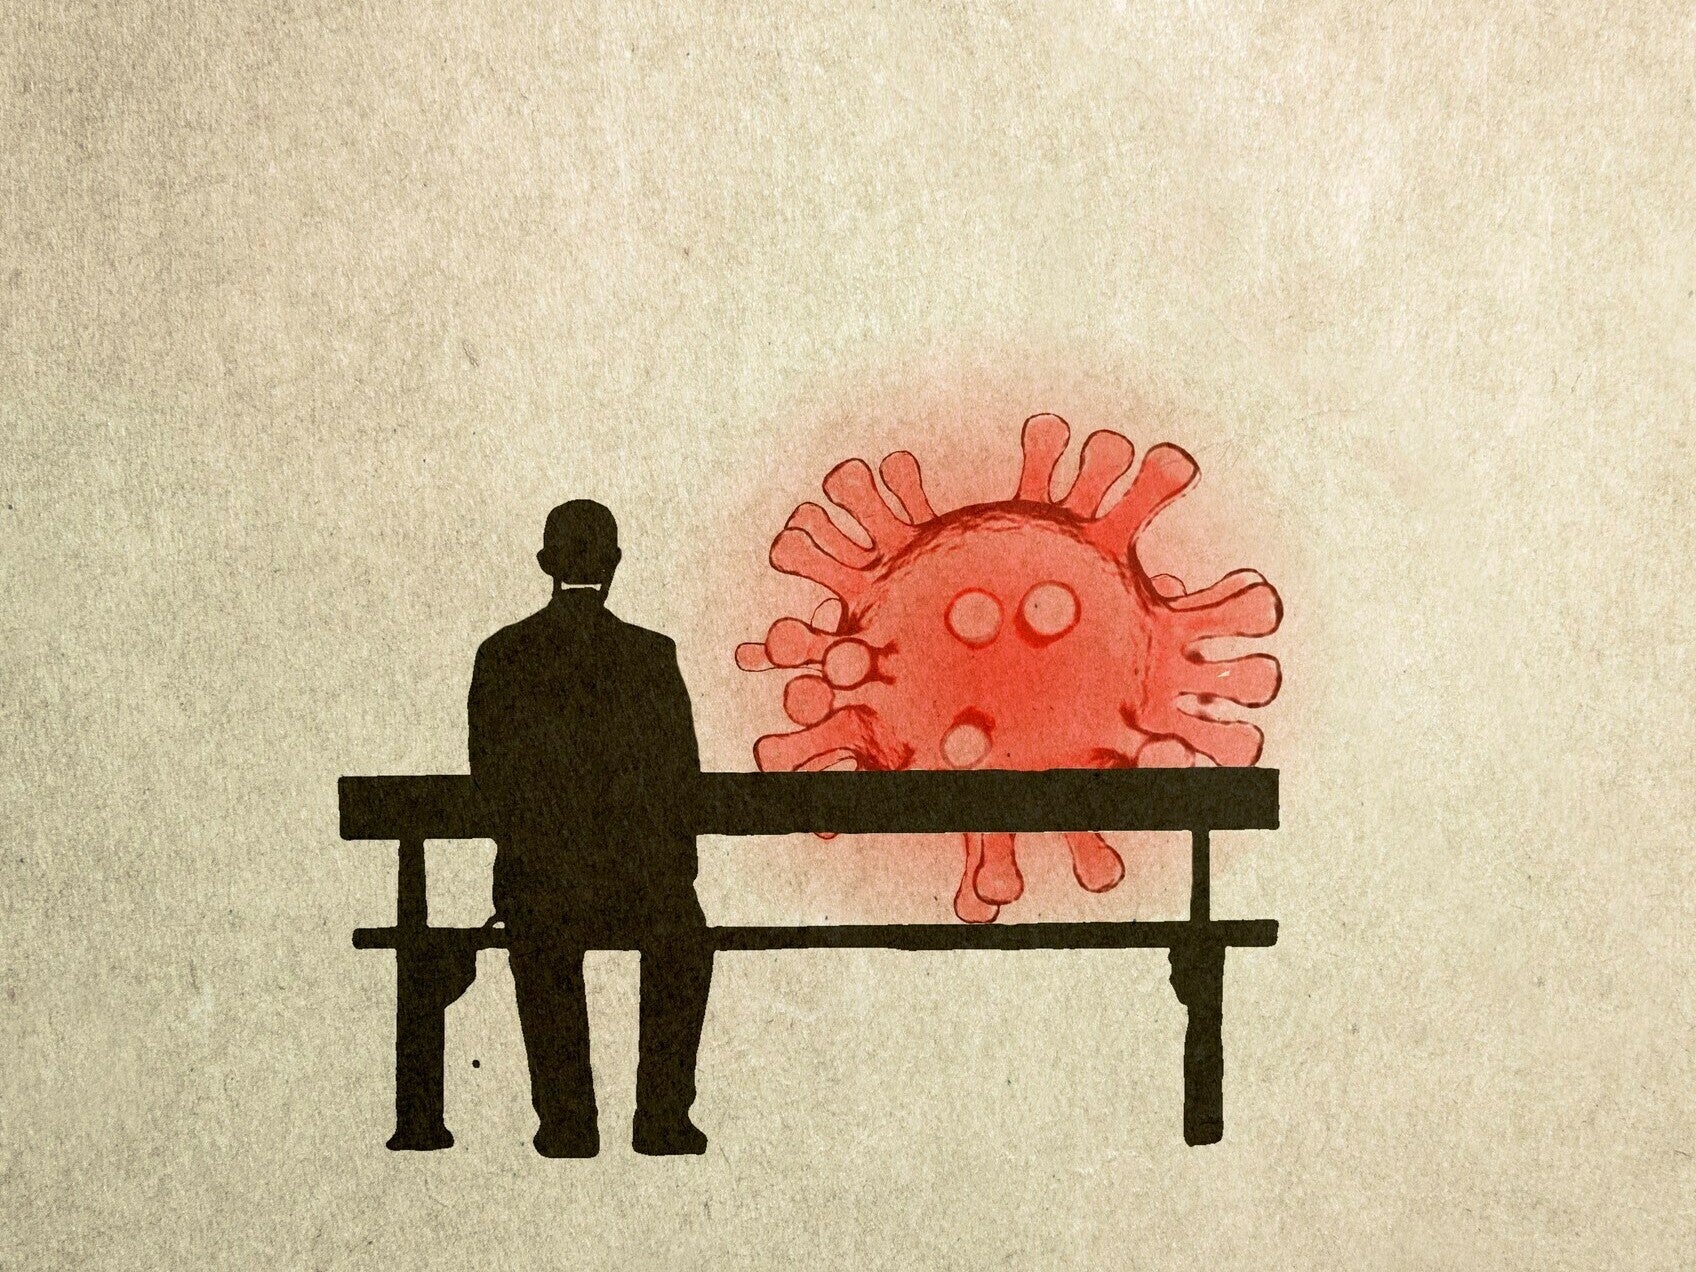 Drawing of a virus